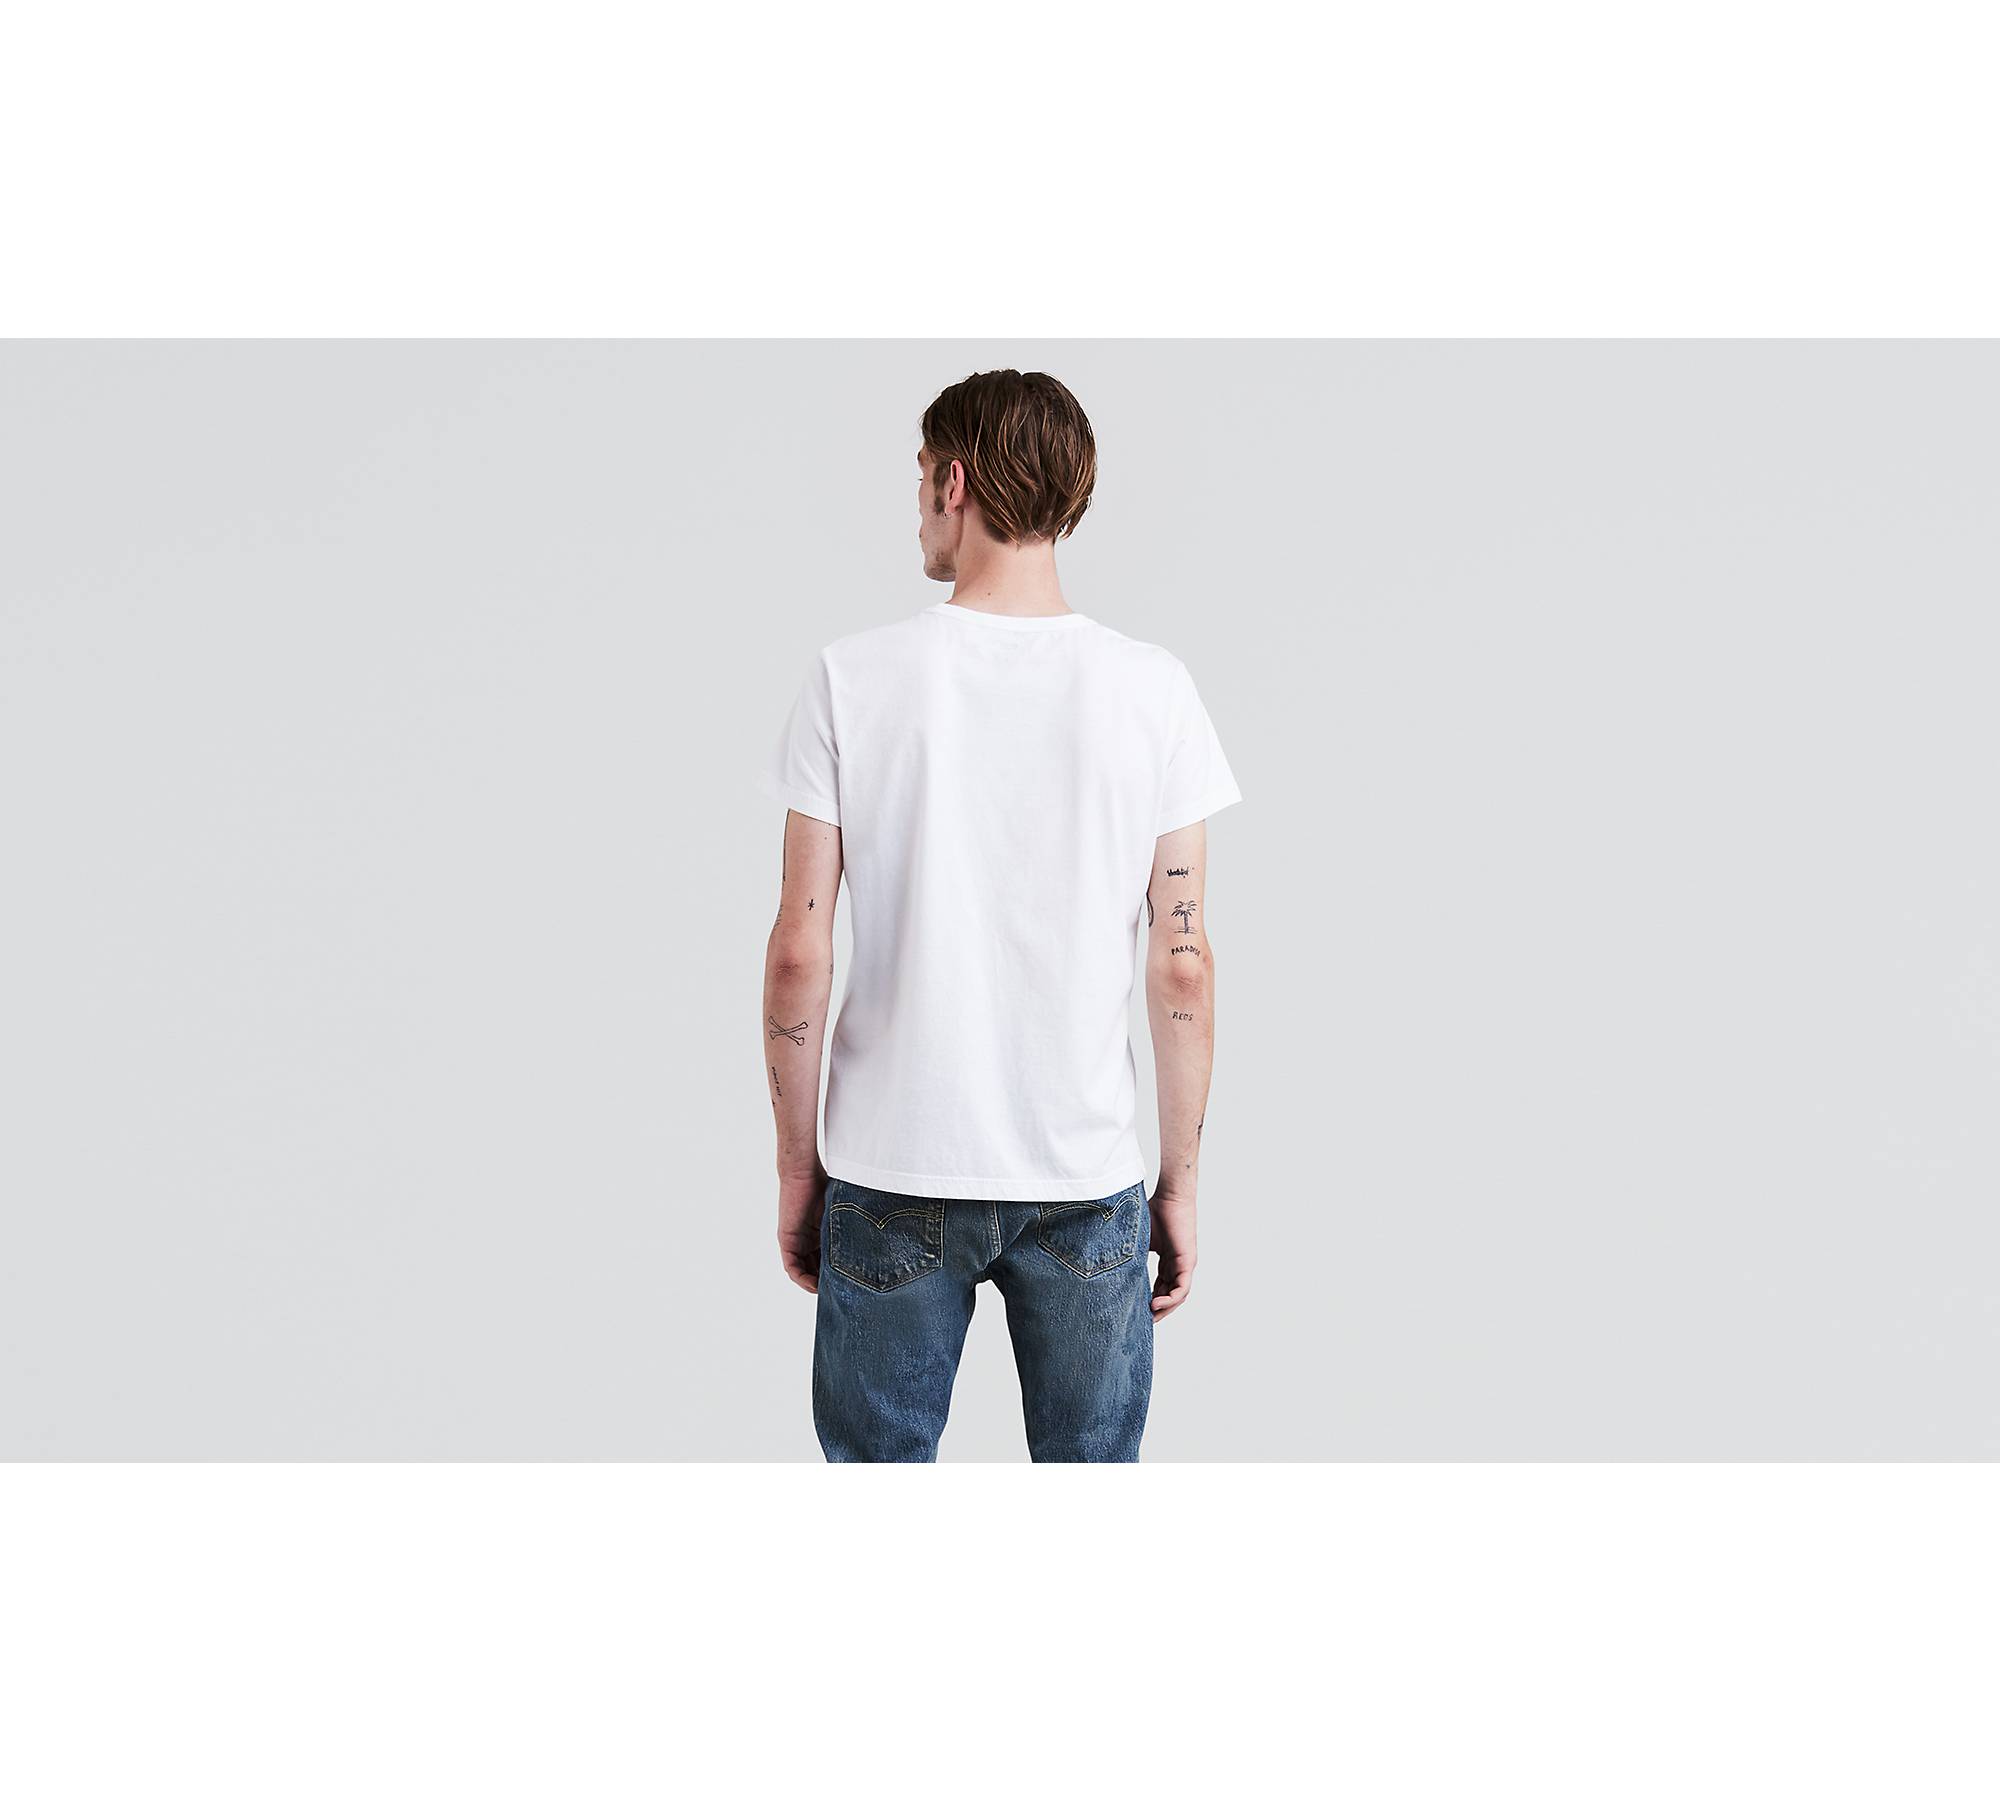 Button Your Fly Tee Shirt - White | Levi's® US